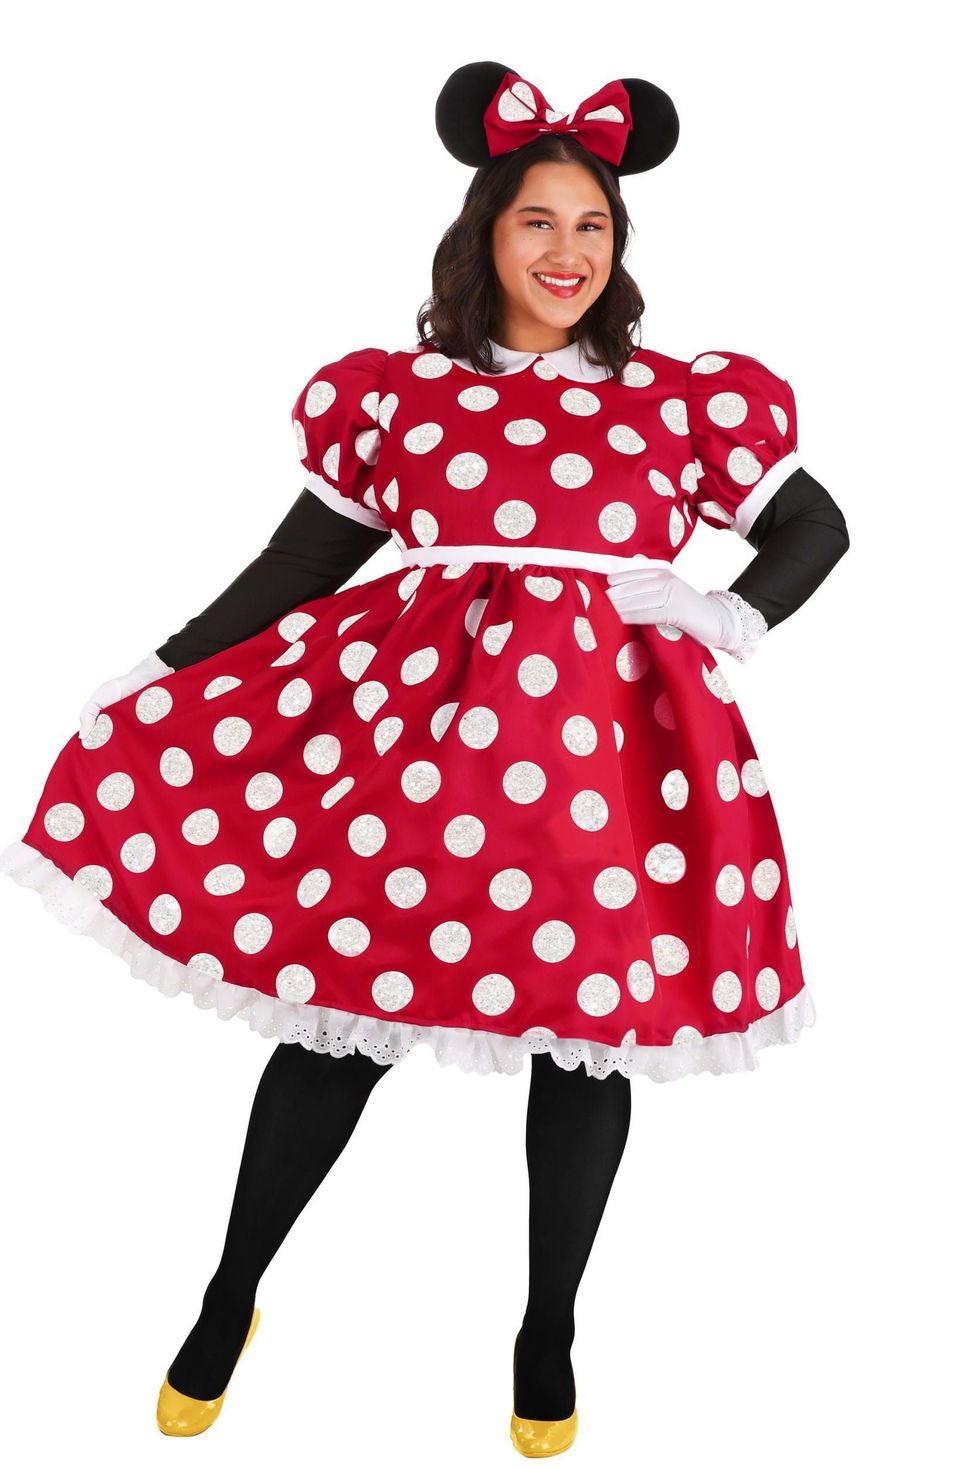 https://hips.hearstapps.com/vader-prod.s3.amazonaws.com/1686327002-plus-size-deluxe-minnie-mouse-costume-alt-4-64834ea53892e.jpg?crop=0.9523809523809524xw:1xh;center,top&resize=980:*